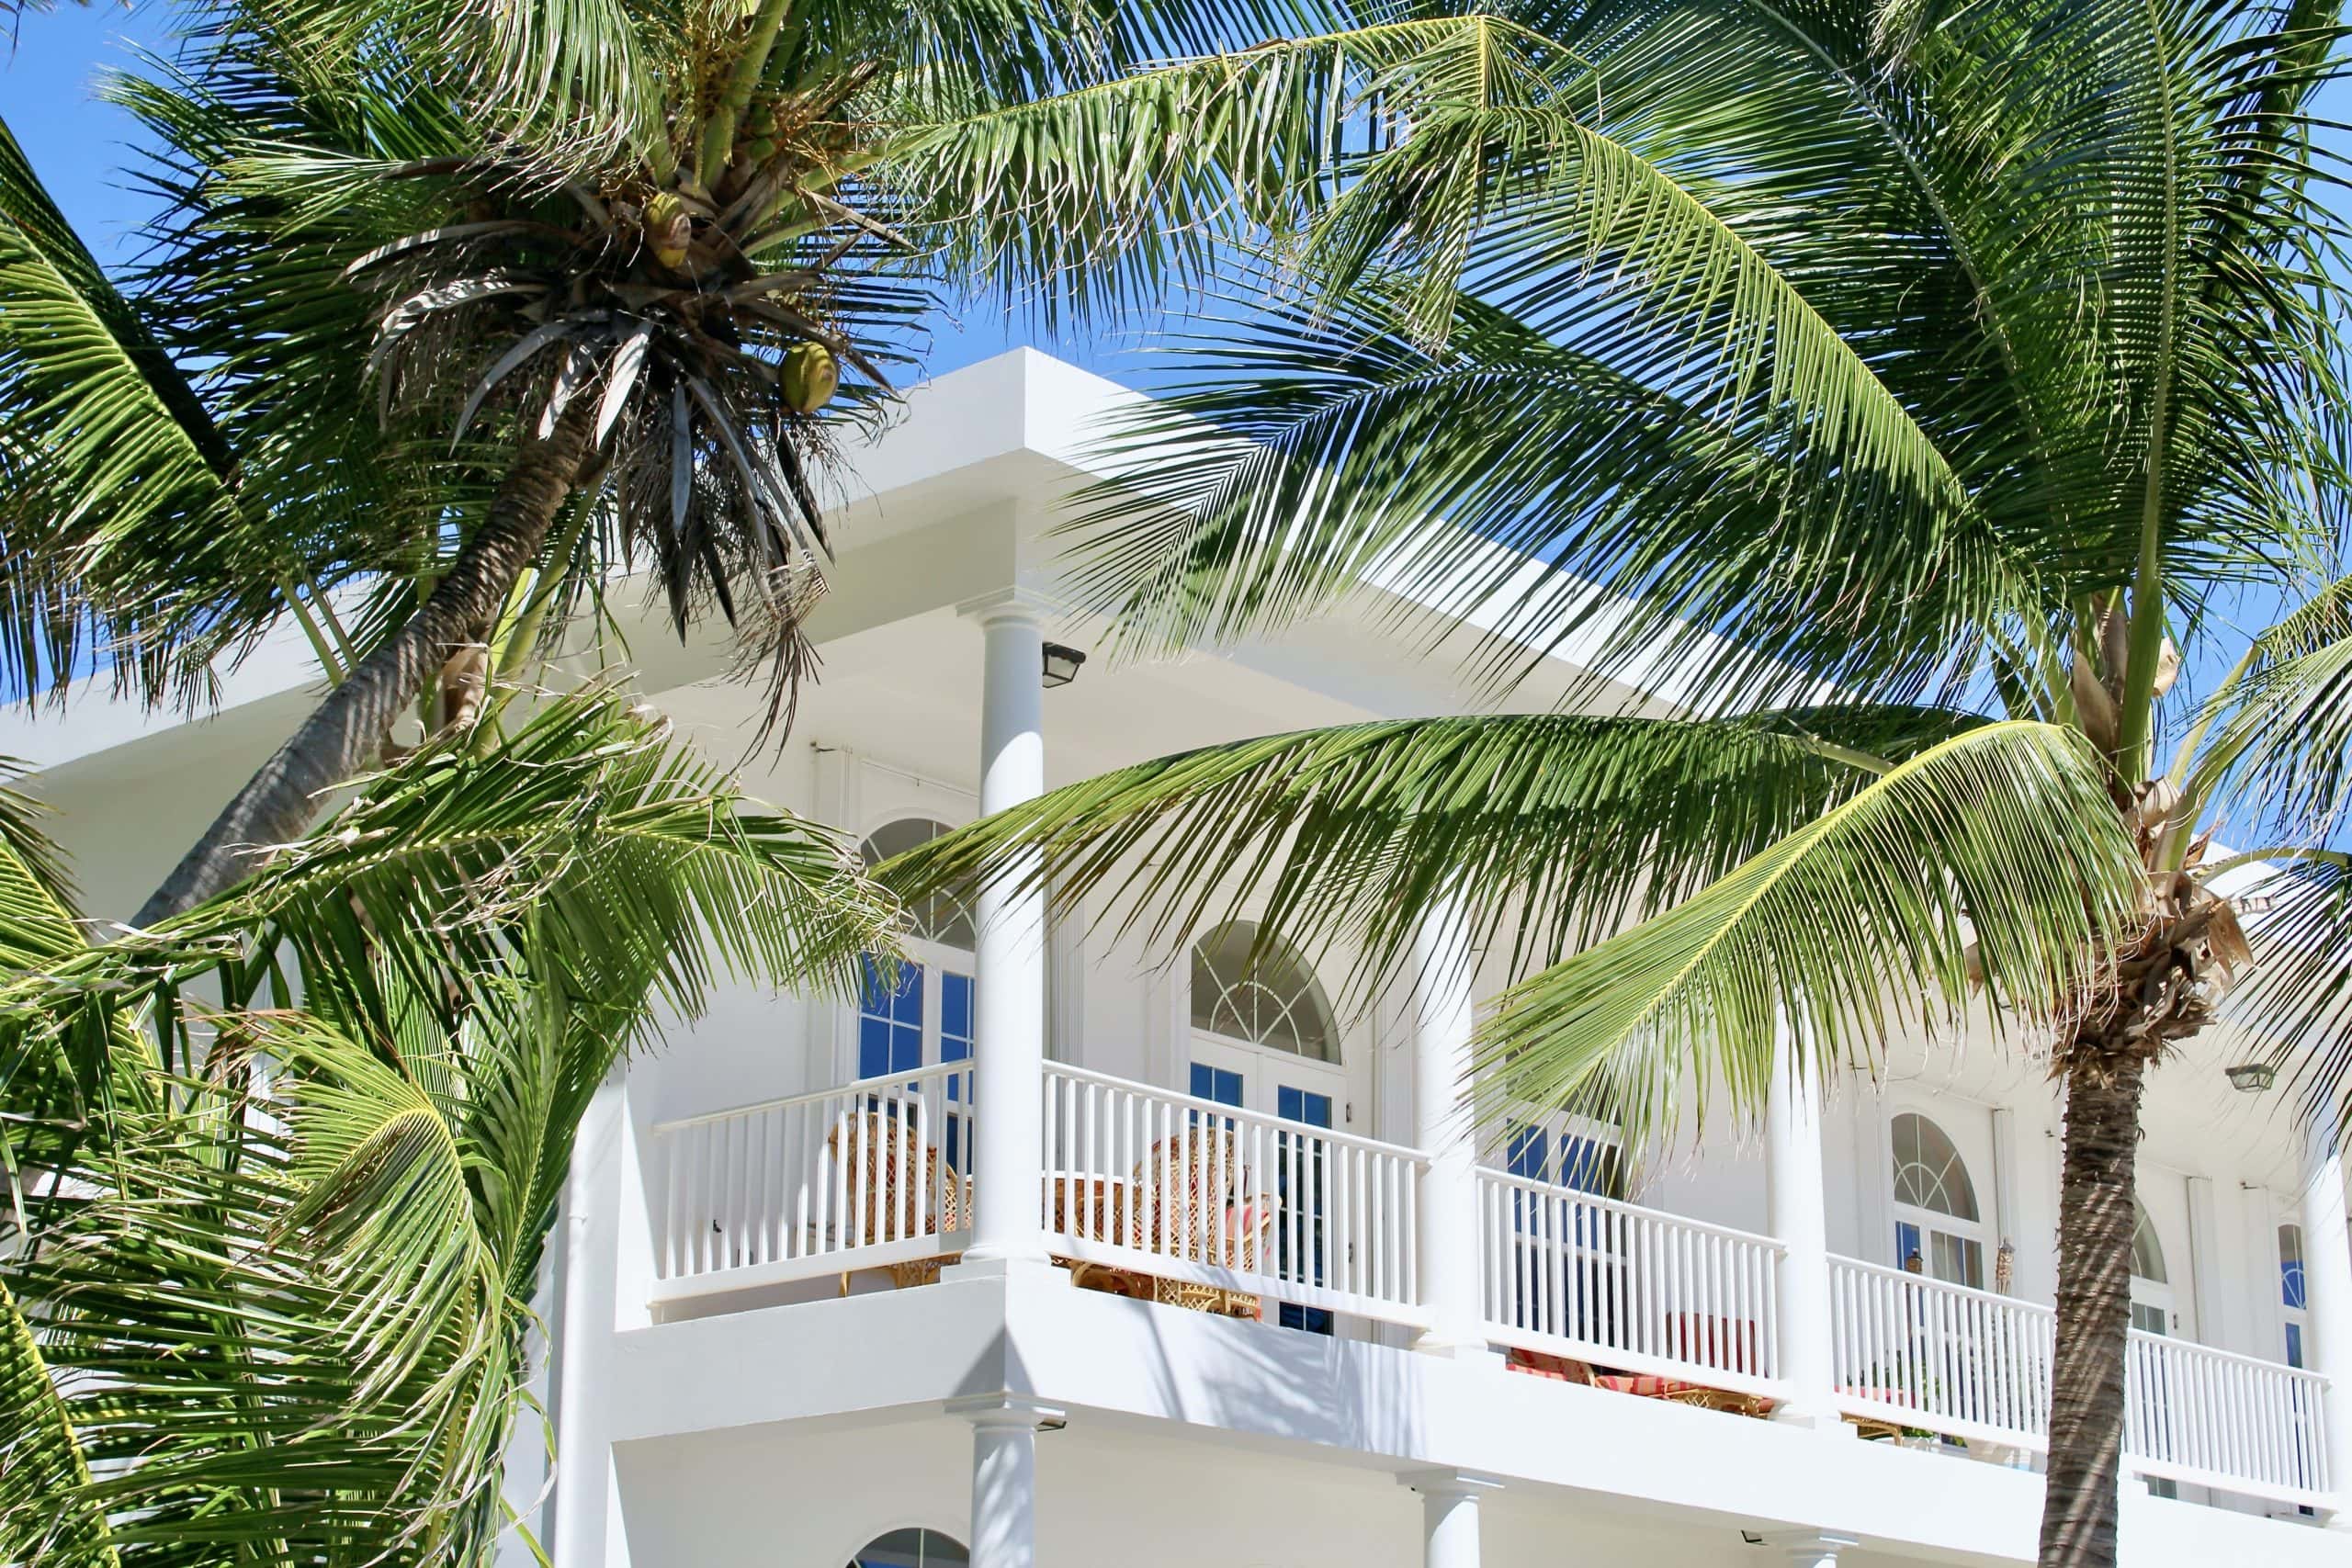 Second floor balcony overlooking the beach and sea, furnished with comfortable seating, providing a picturesque setting to relax, soak up the sun, and enjoy breathtaking ocean views.